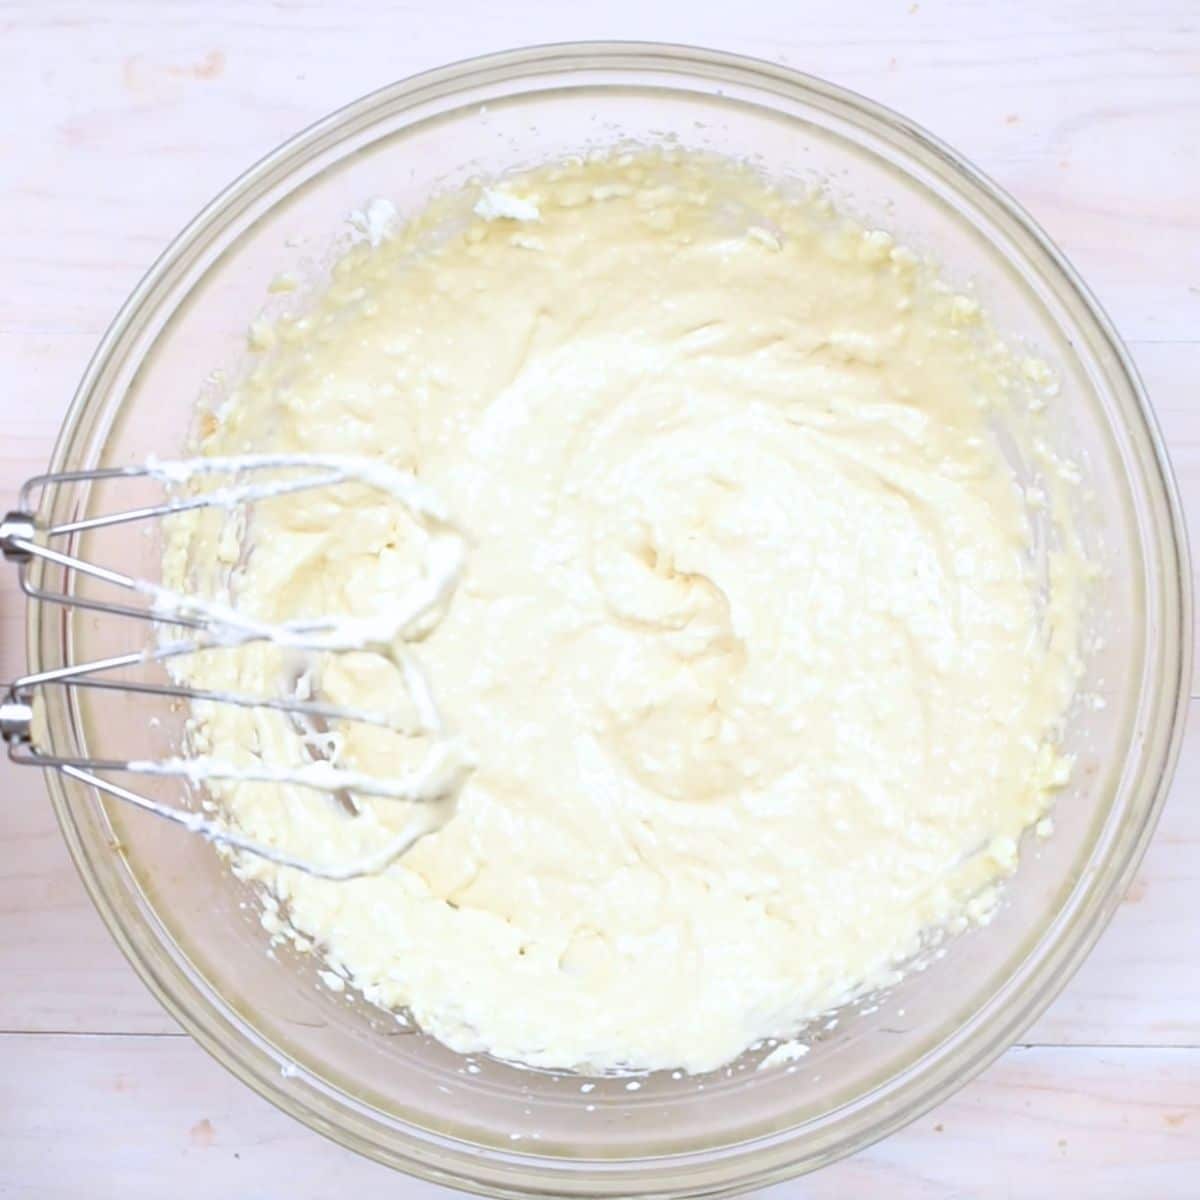 cheesecake batter in clear bowl with mixer beaters.